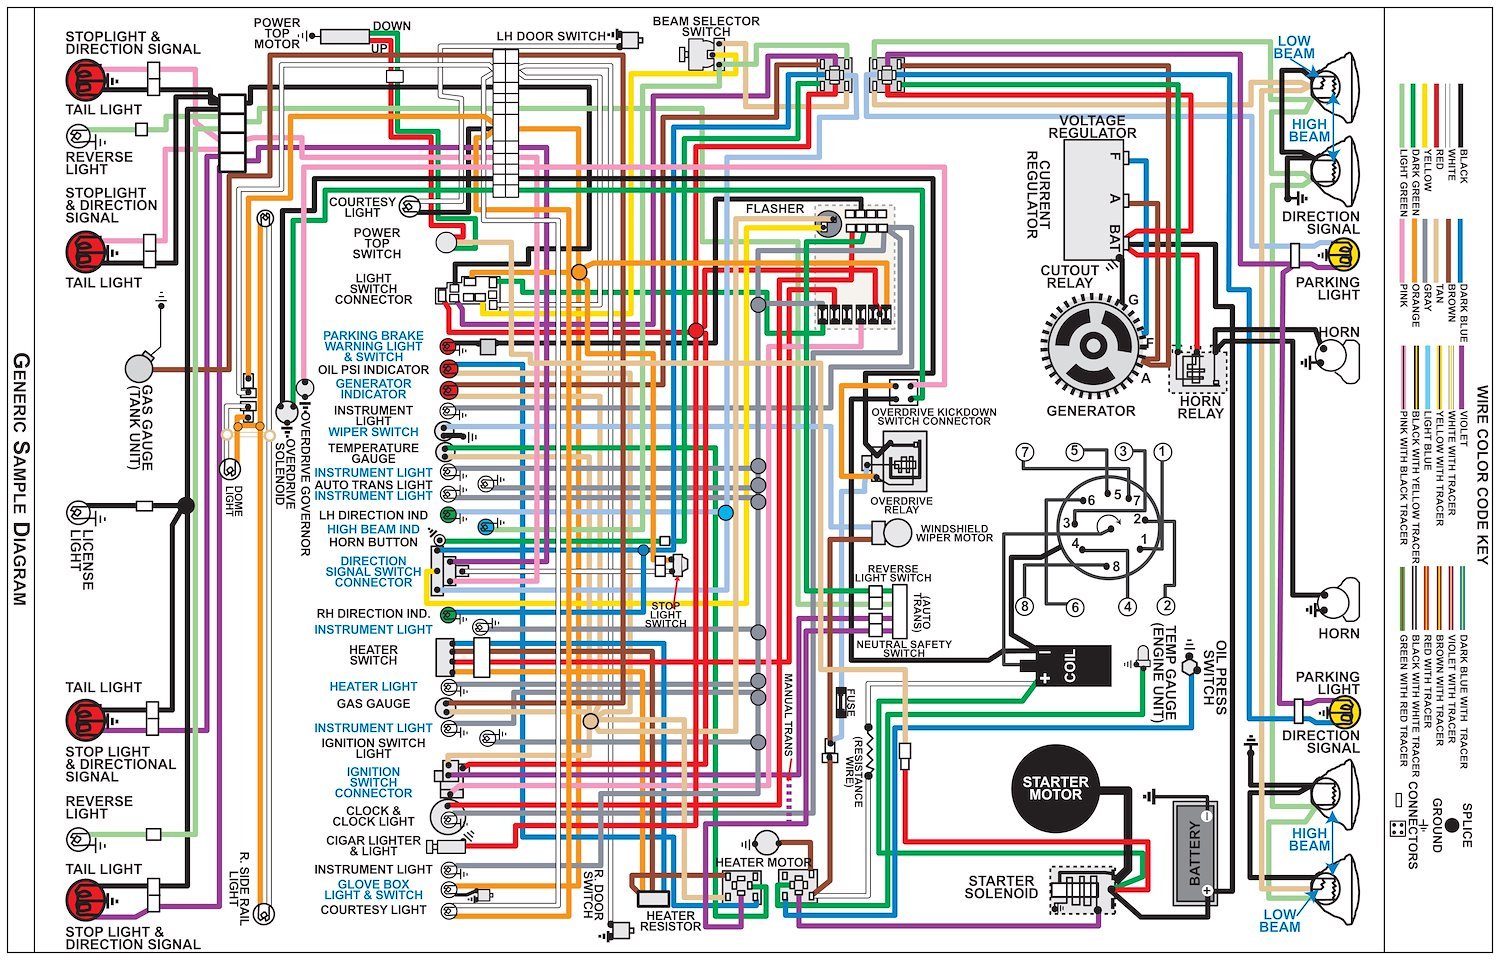 Wiring Diagram for 1937 Cadillac V8 Series 37-70,